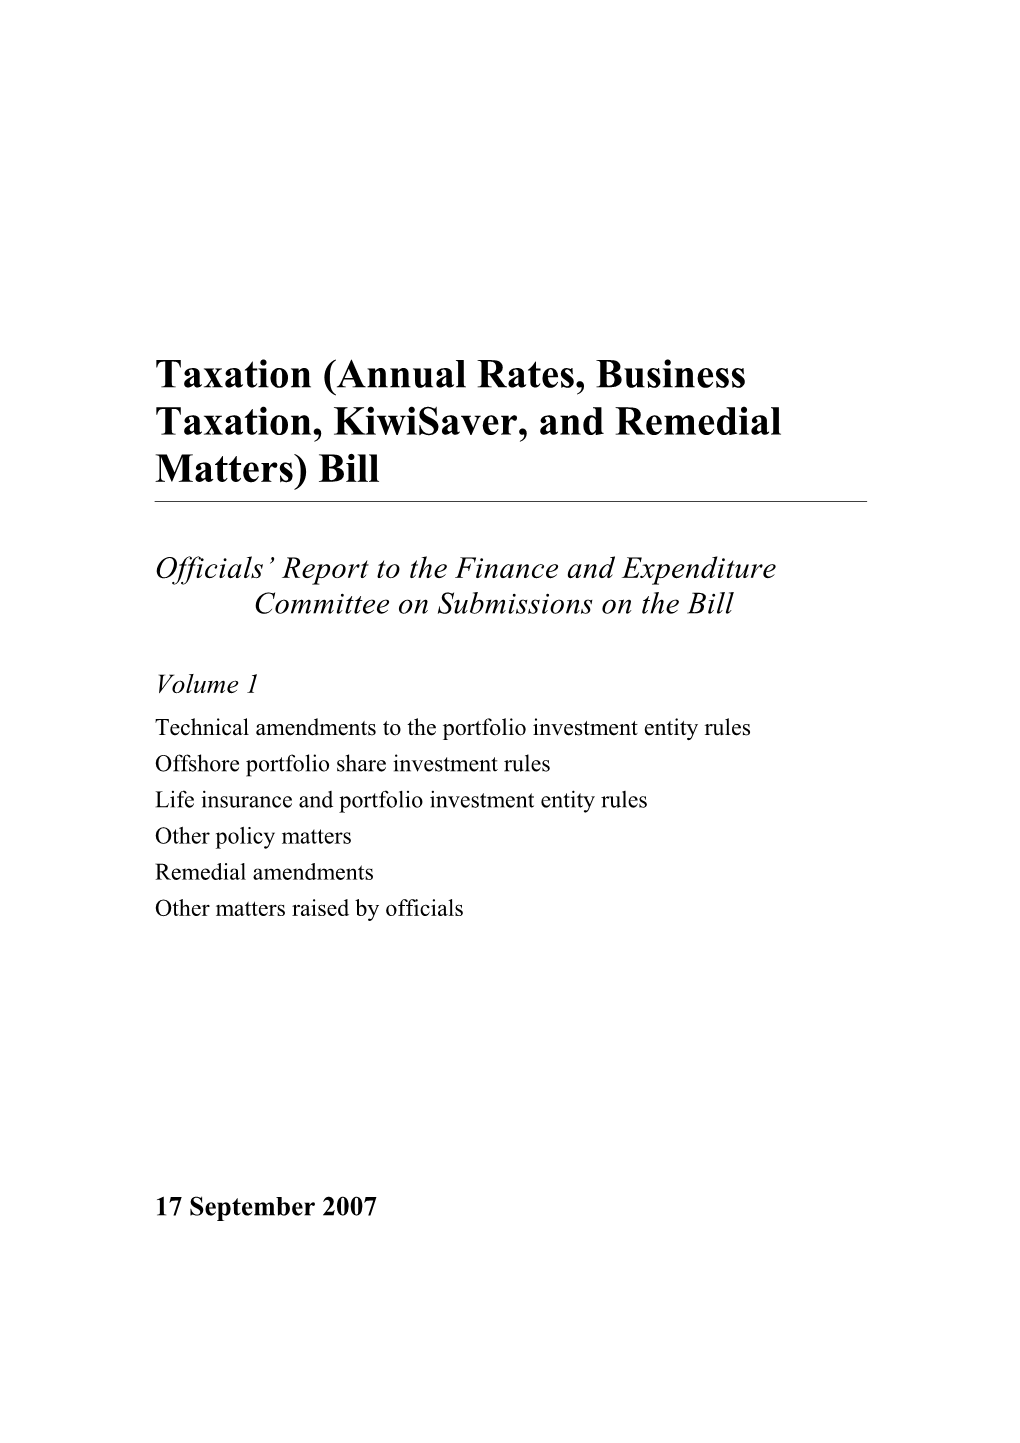 Taxation (Annual Rates, Business Taxation, Kiwisaver, and Remedial Matters) Bill - Volume 1